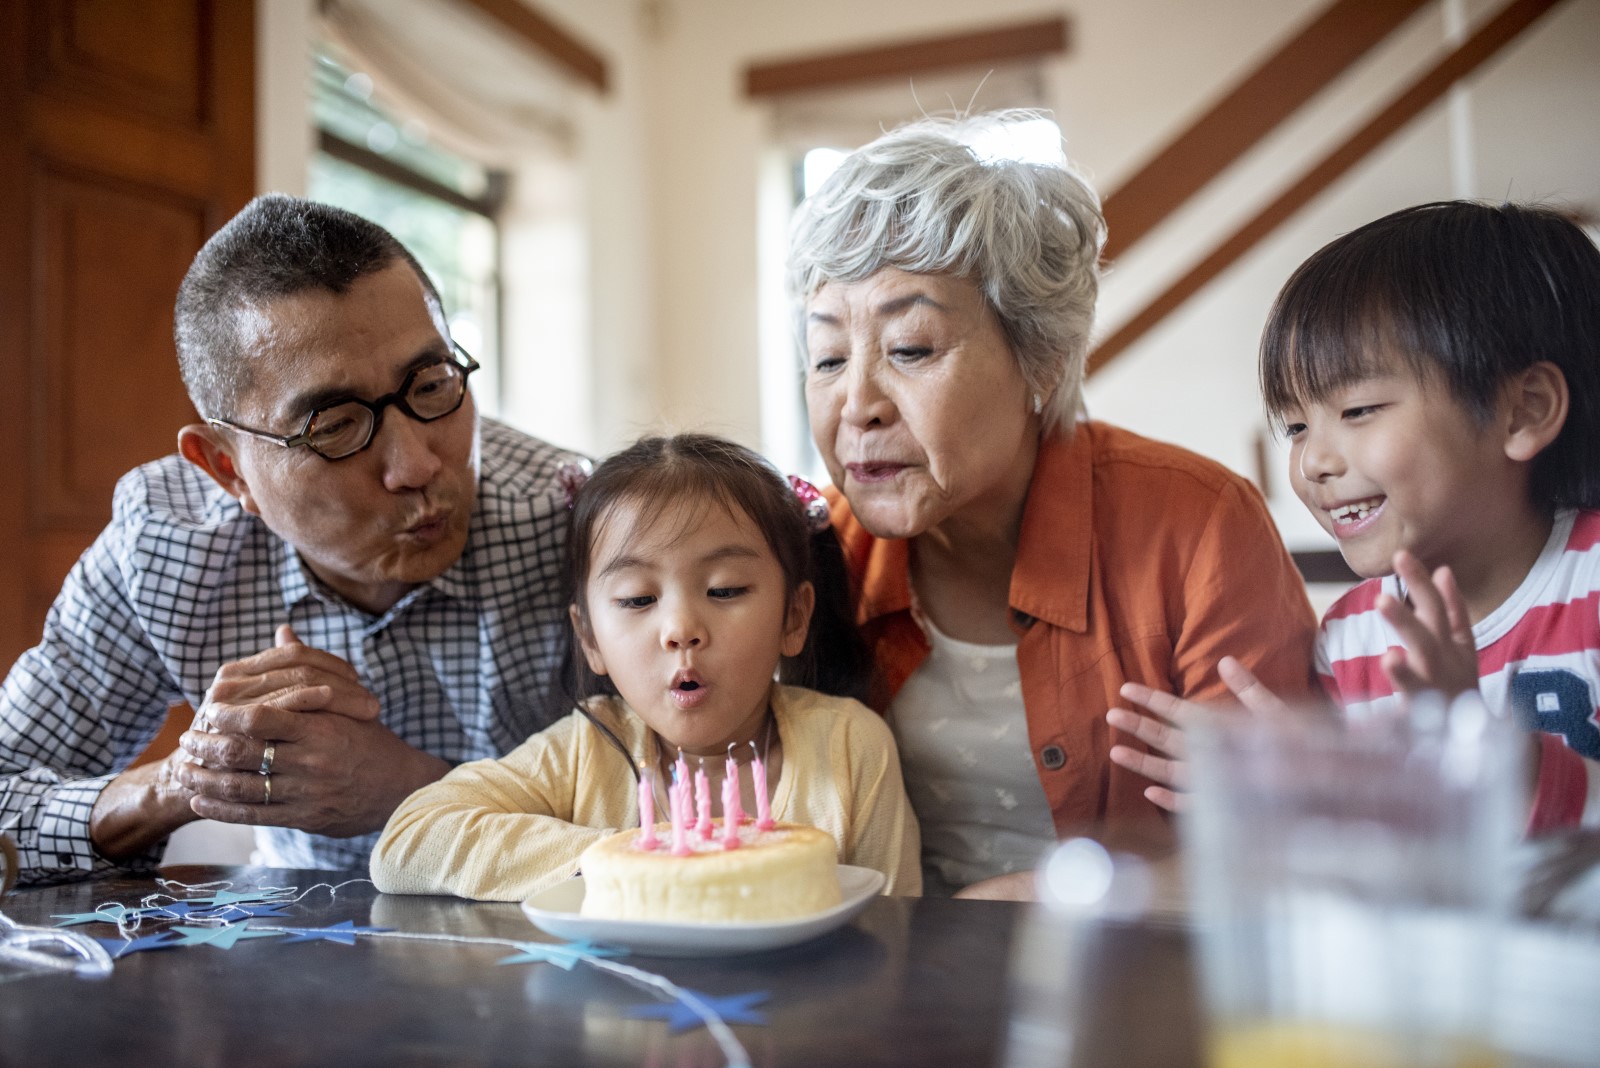 grandparents celebrate a birthday with young children